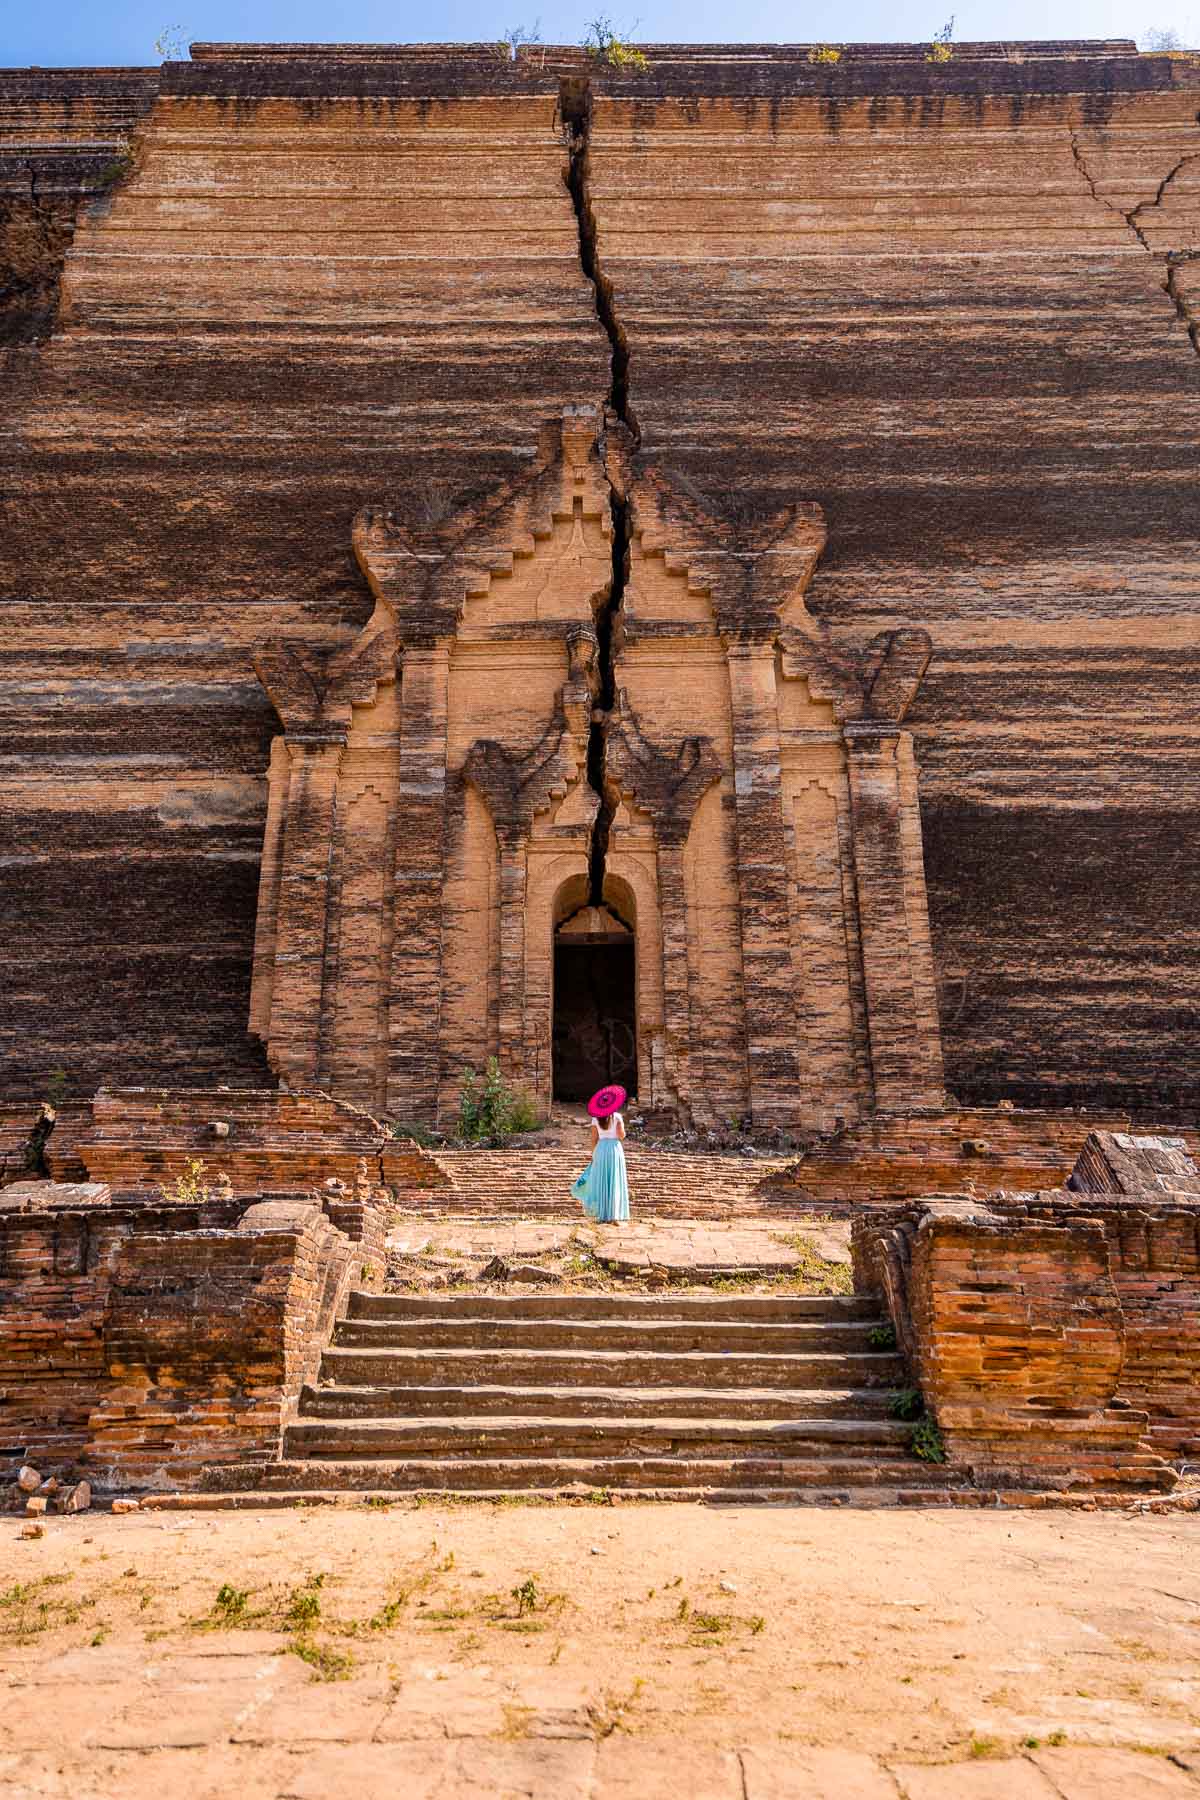 Girl in front of the unfinished pagoda in Myanmar